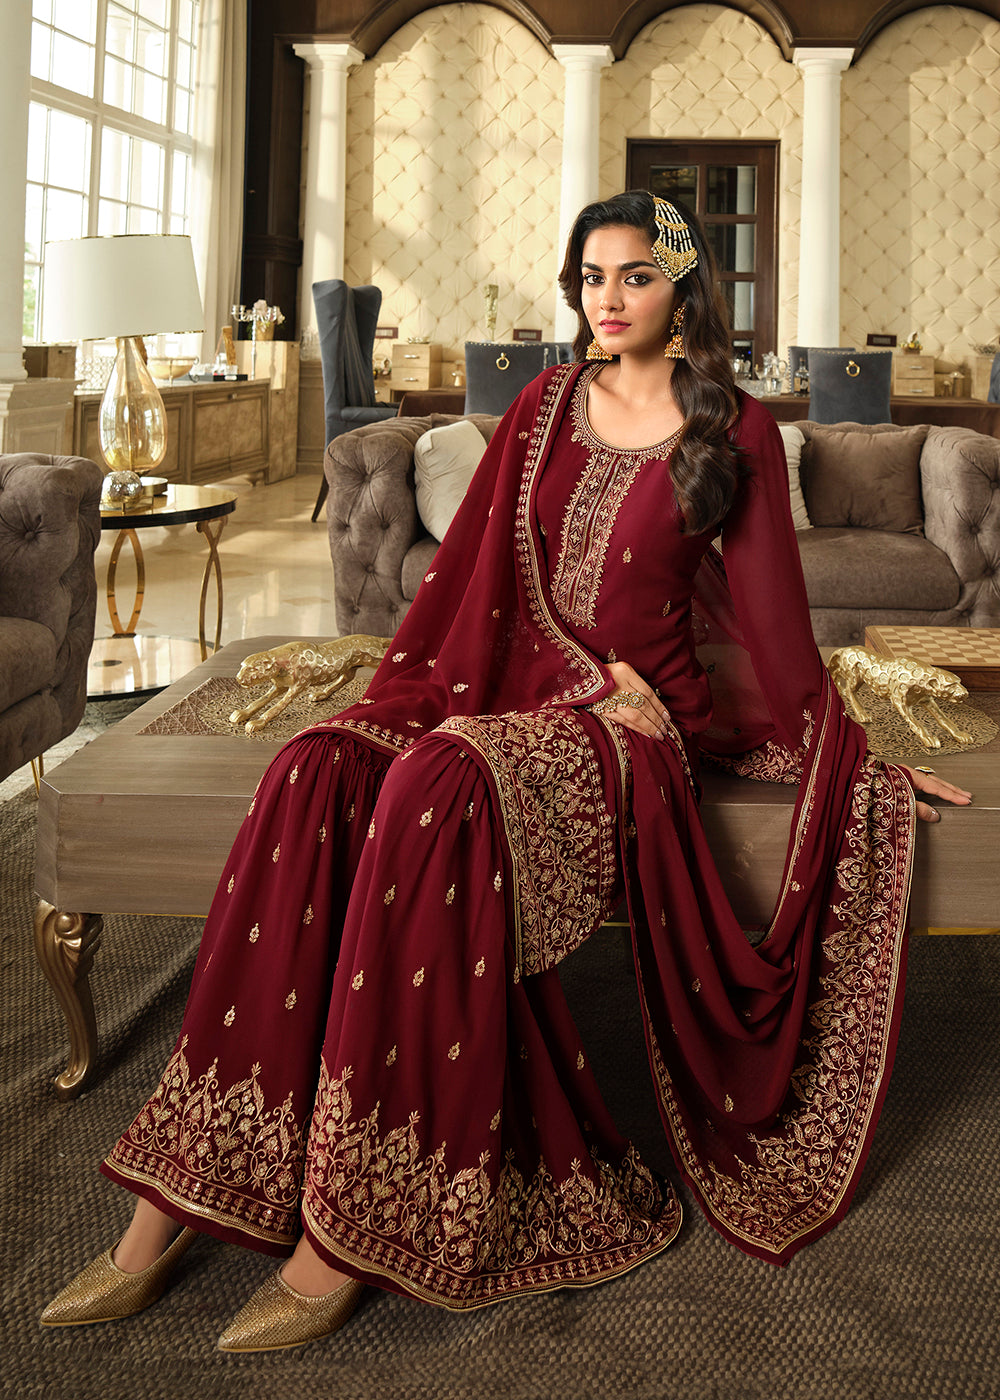 Shop Now Lovely Maroon Embroidered Georgette Pakistani Gharara Suit Online at Empress Clothing in USA, UK, Canada, Germany & Worldwide.